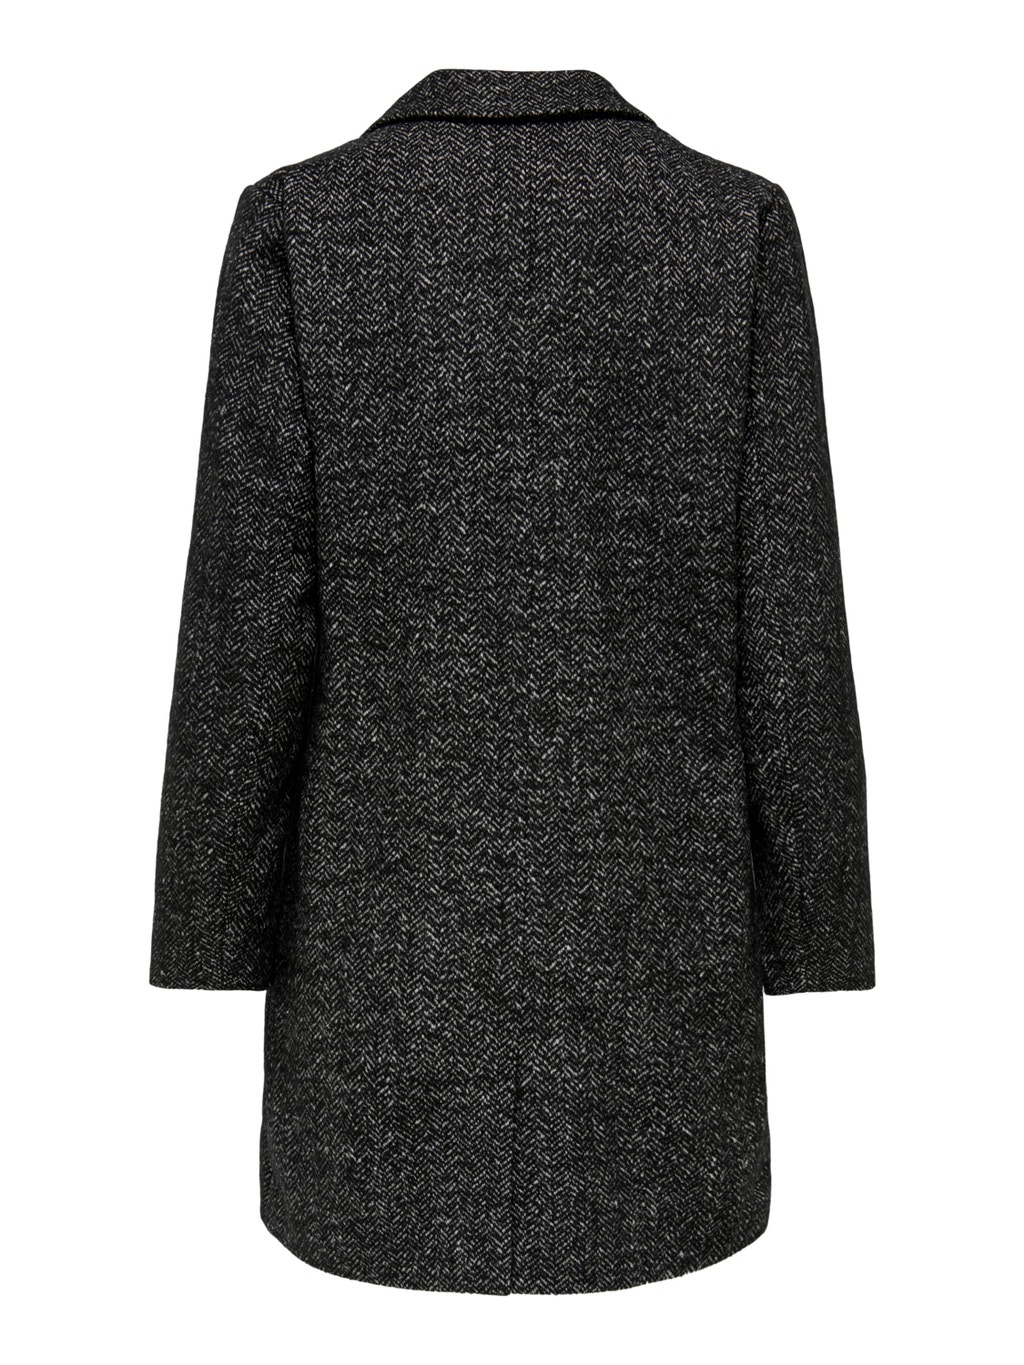 Wool coat 40% alennuksella | ONLY®